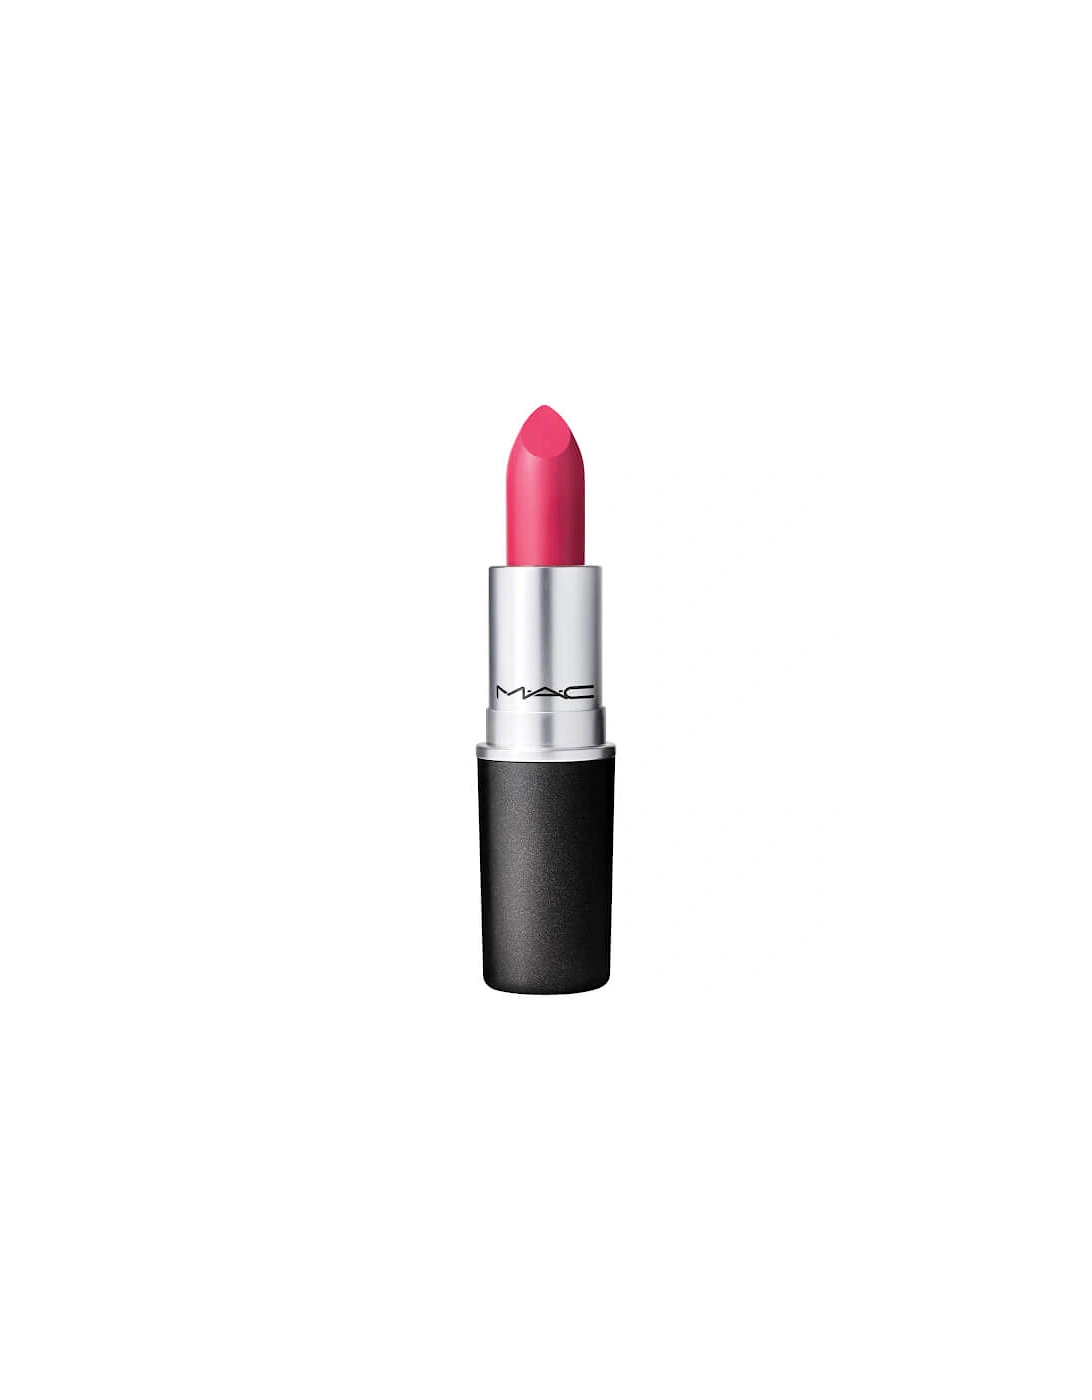 Amplified Crème Lipstick Re-Think Pink - Just wondering, 2 of 1